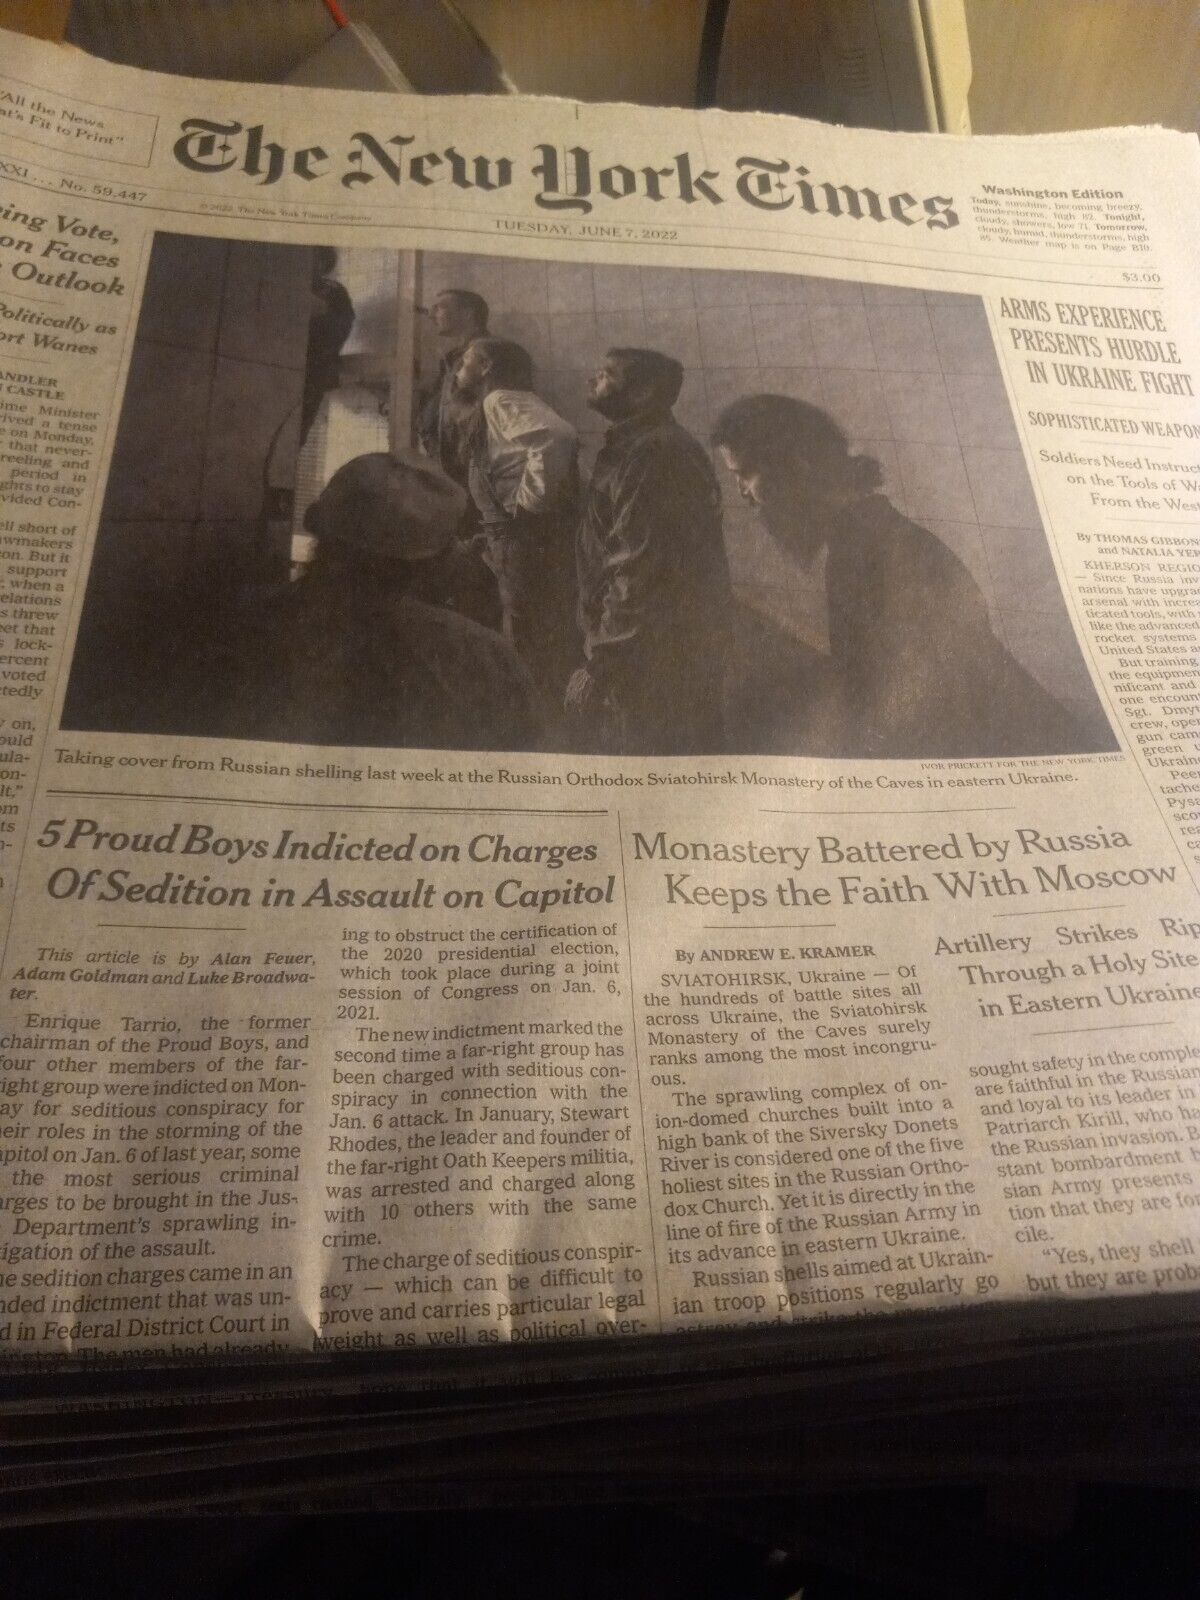 THE NEW YORK TIMES TUESDAY JUNE 7, 2022